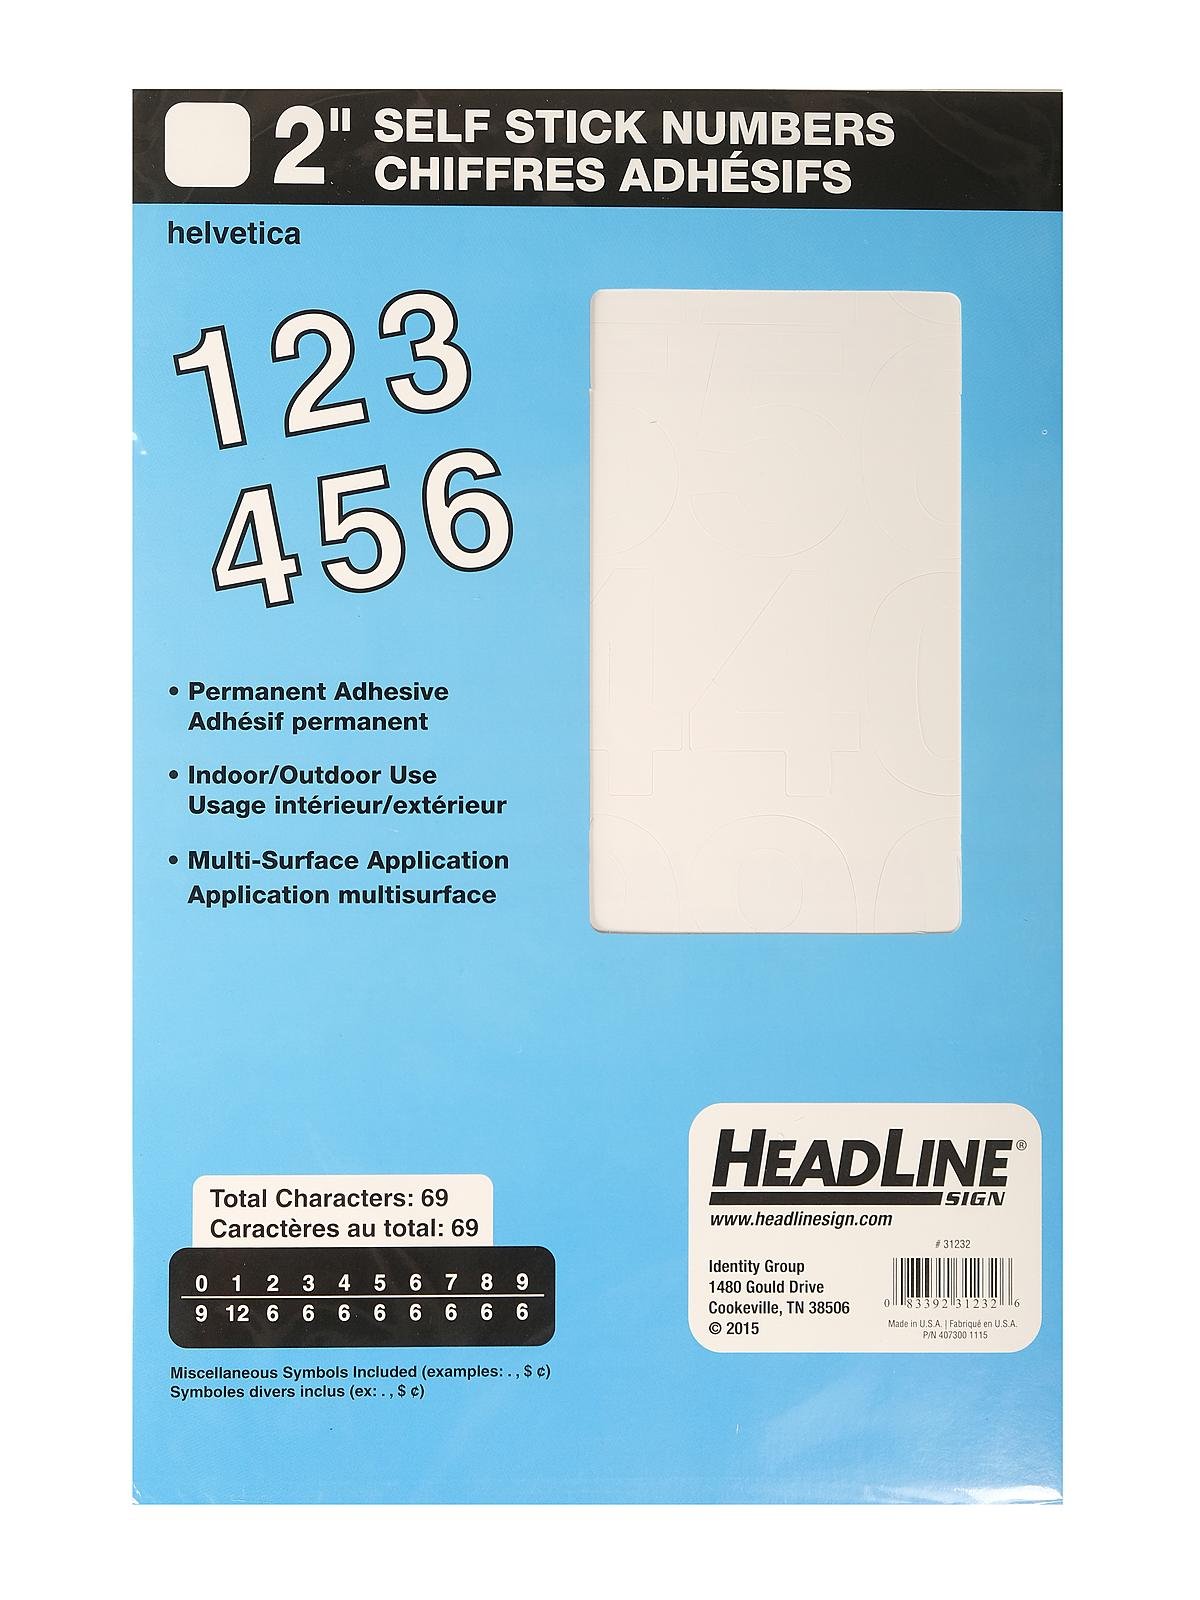 HeadLine - White Vinyl Stick-On Letters or Numbers